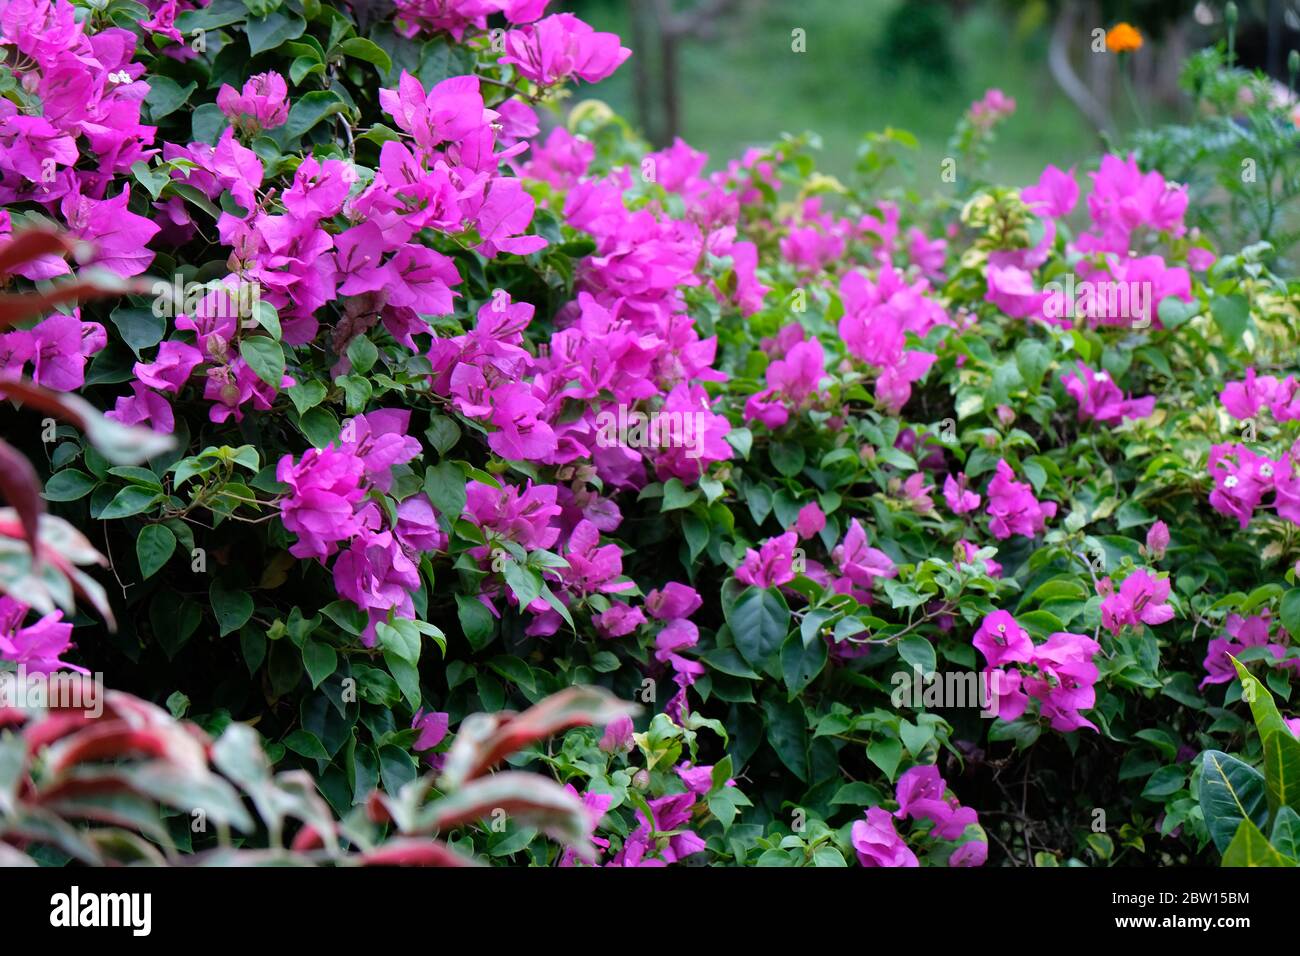 Bougainville is a popular ornamental plant. The shape is a small tree that is difficult to grow upright. Stock Photo